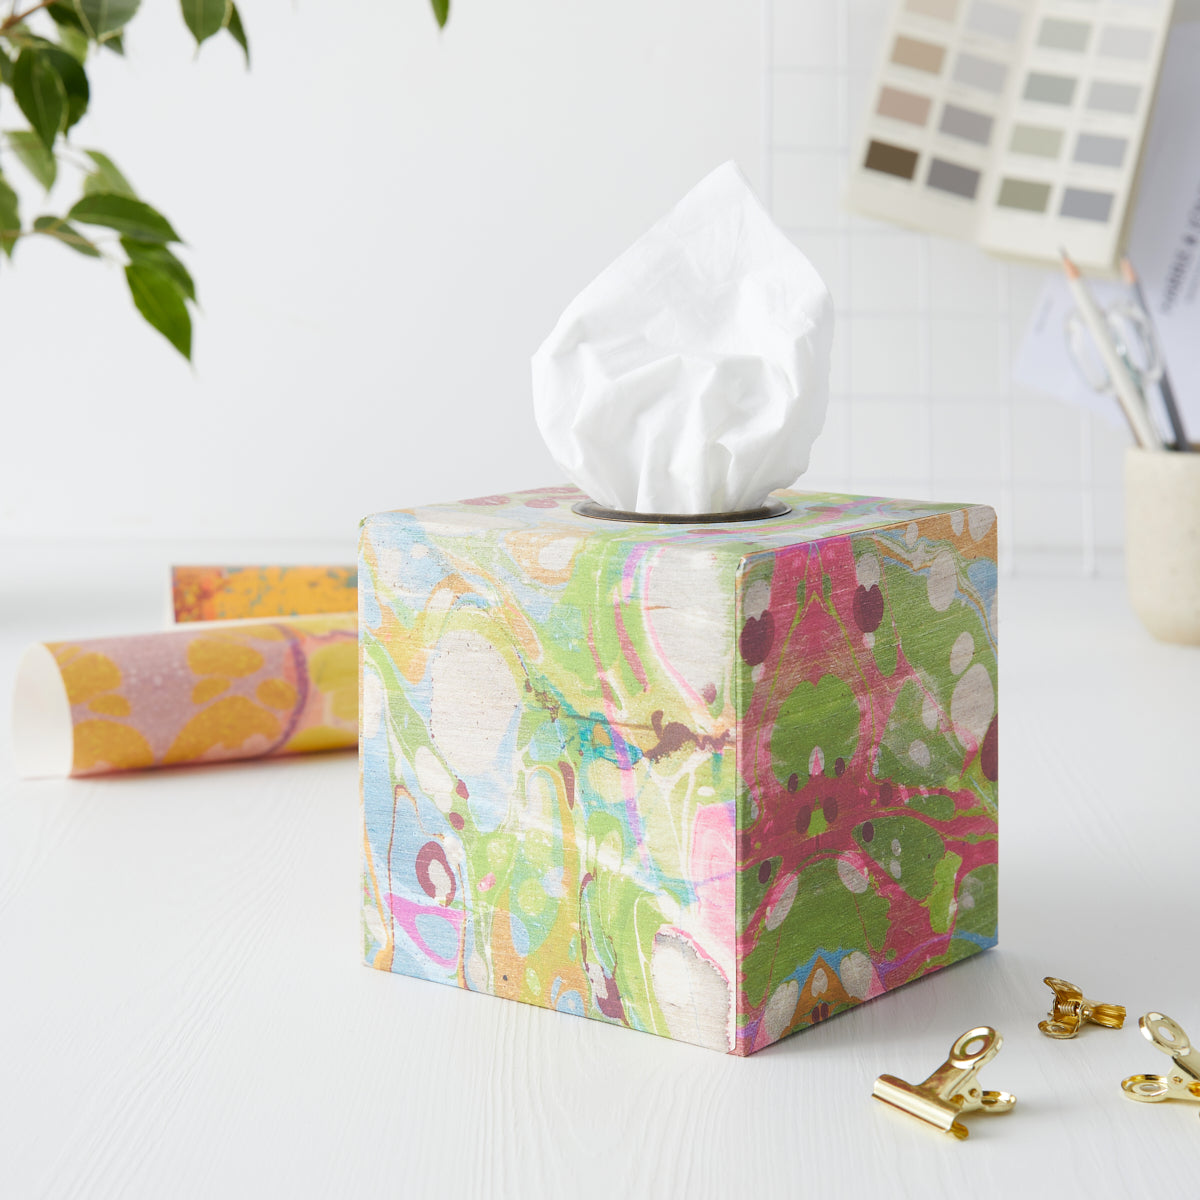 Send Your Own Paper Tissue Boxes